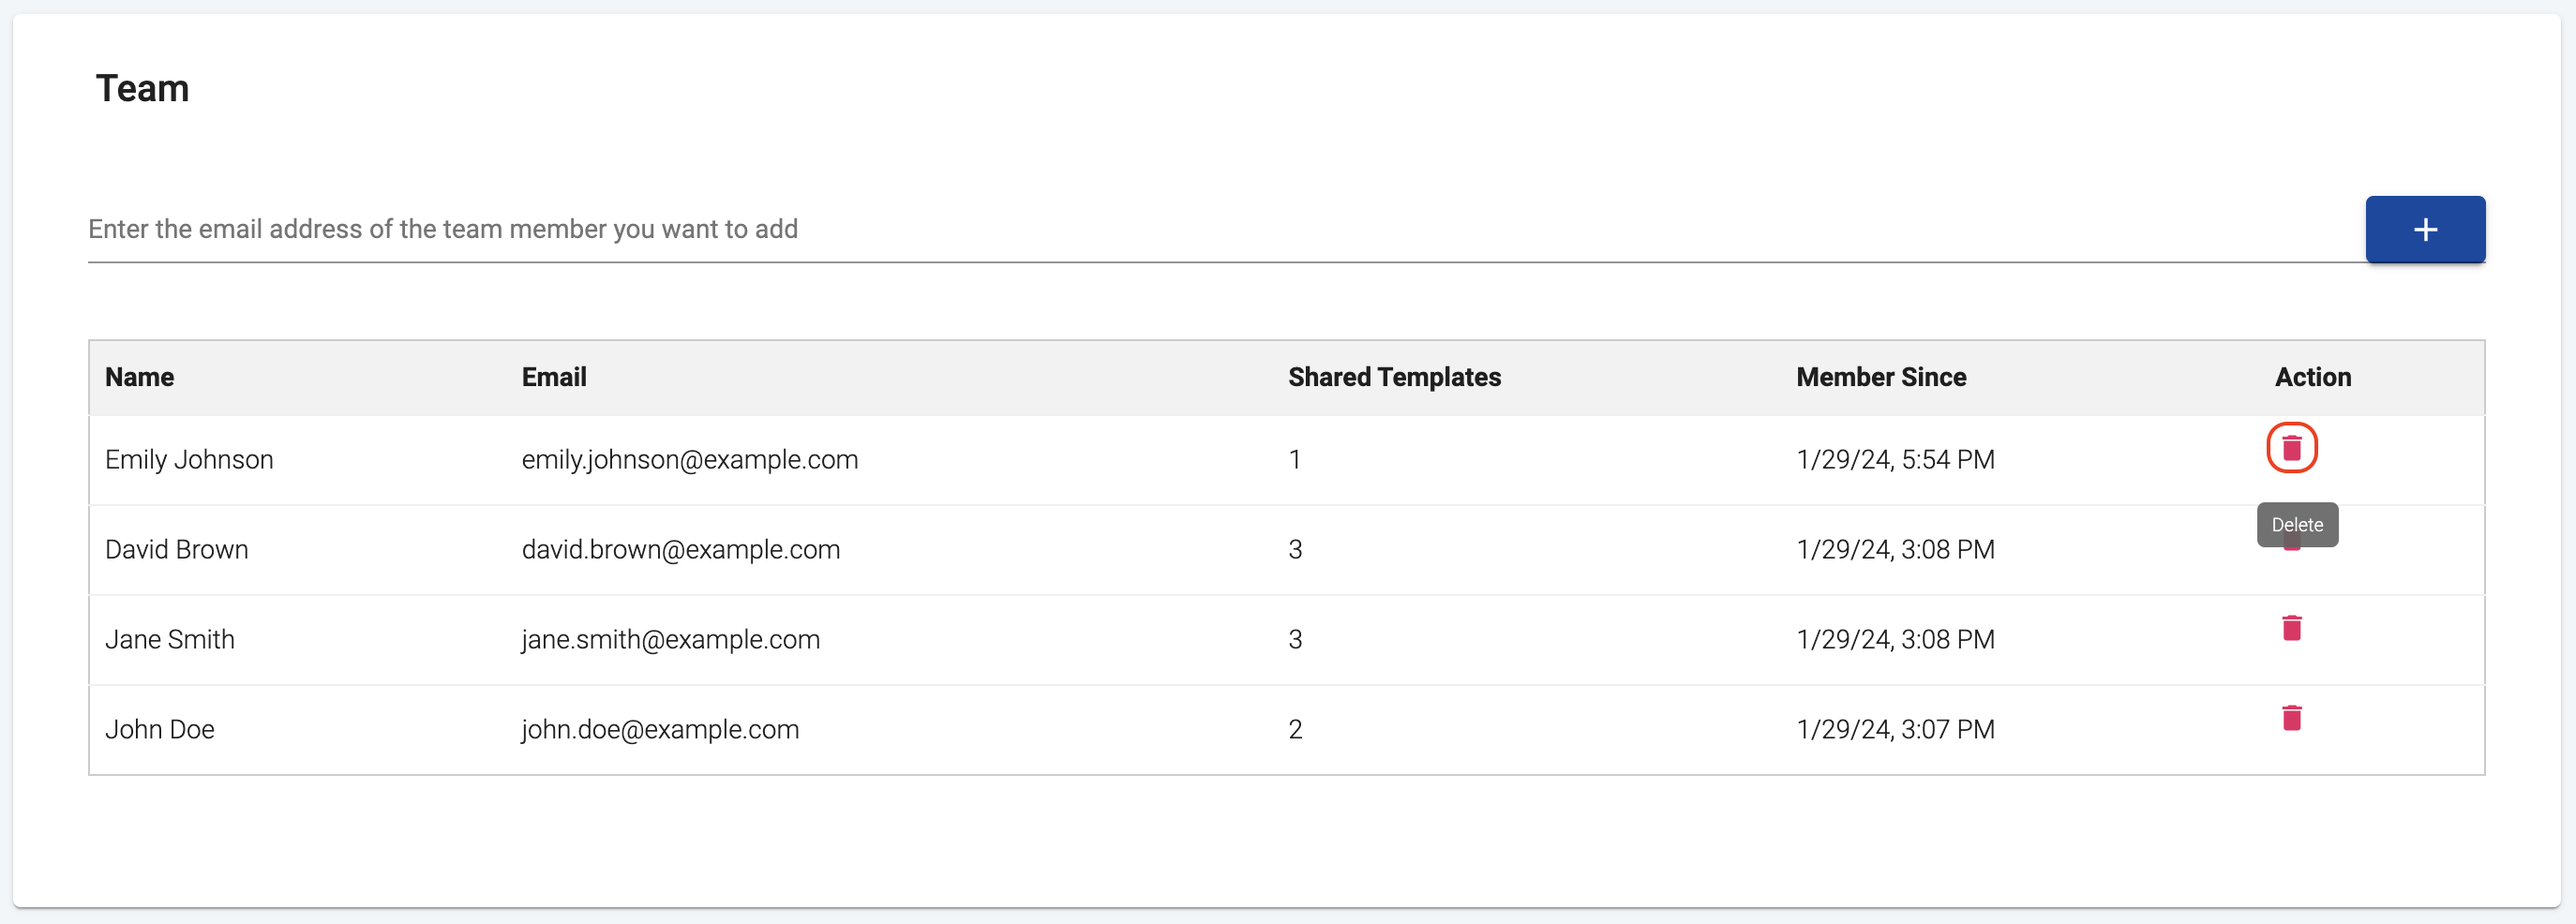 Remove a team member and revoke access to the shared templates